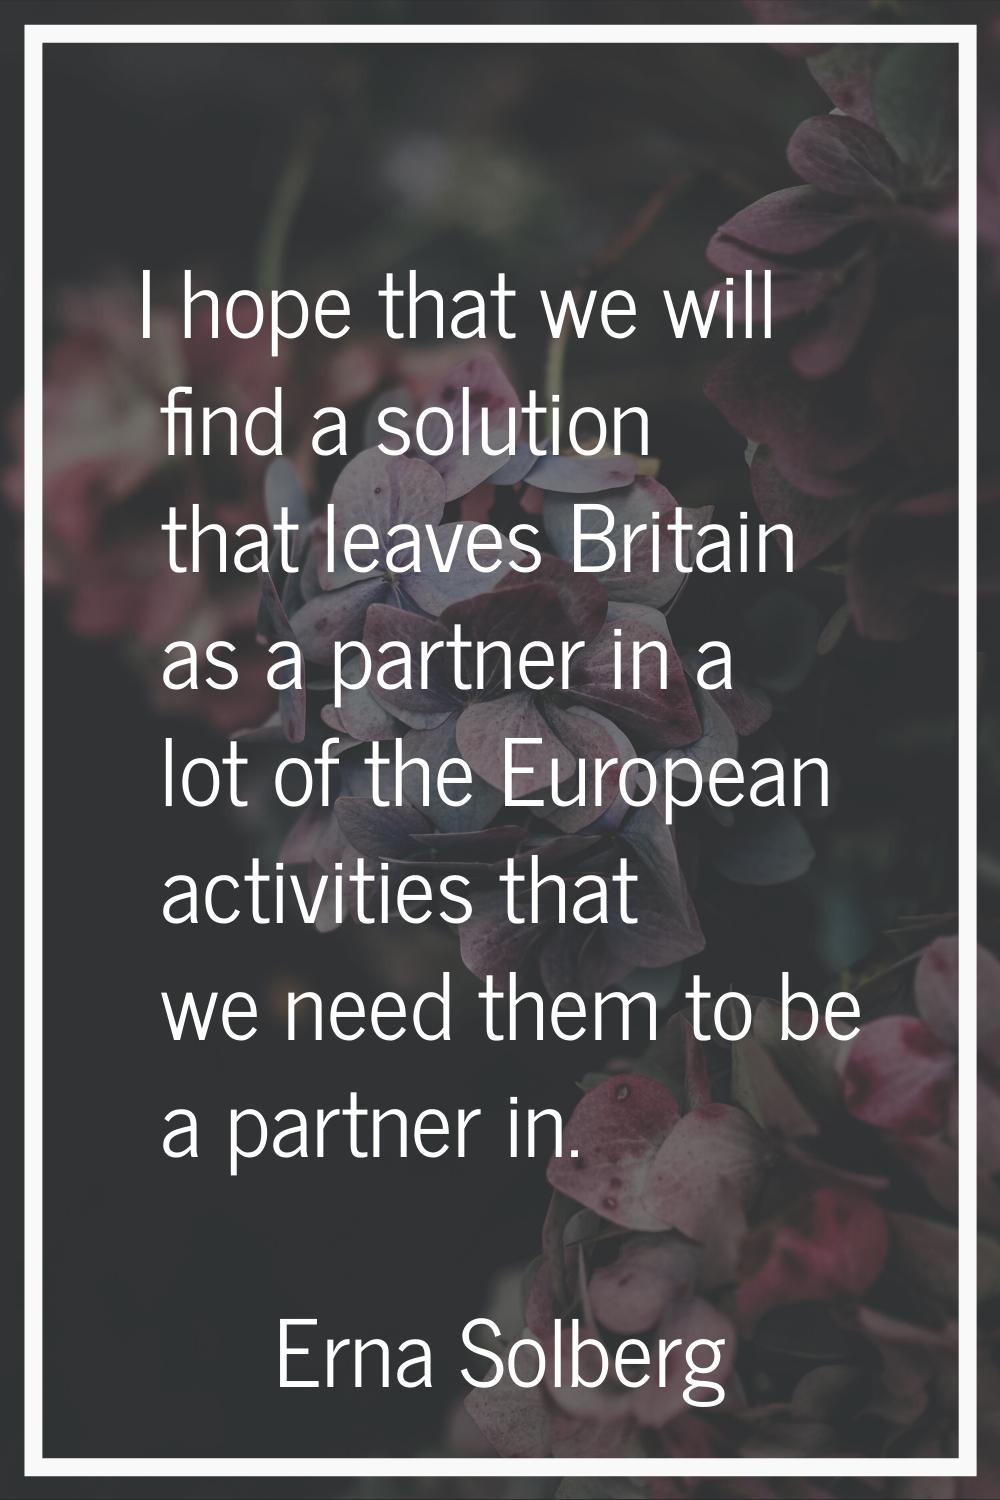 I hope that we will find a solution that leaves Britain as a partner in a lot of the European activ